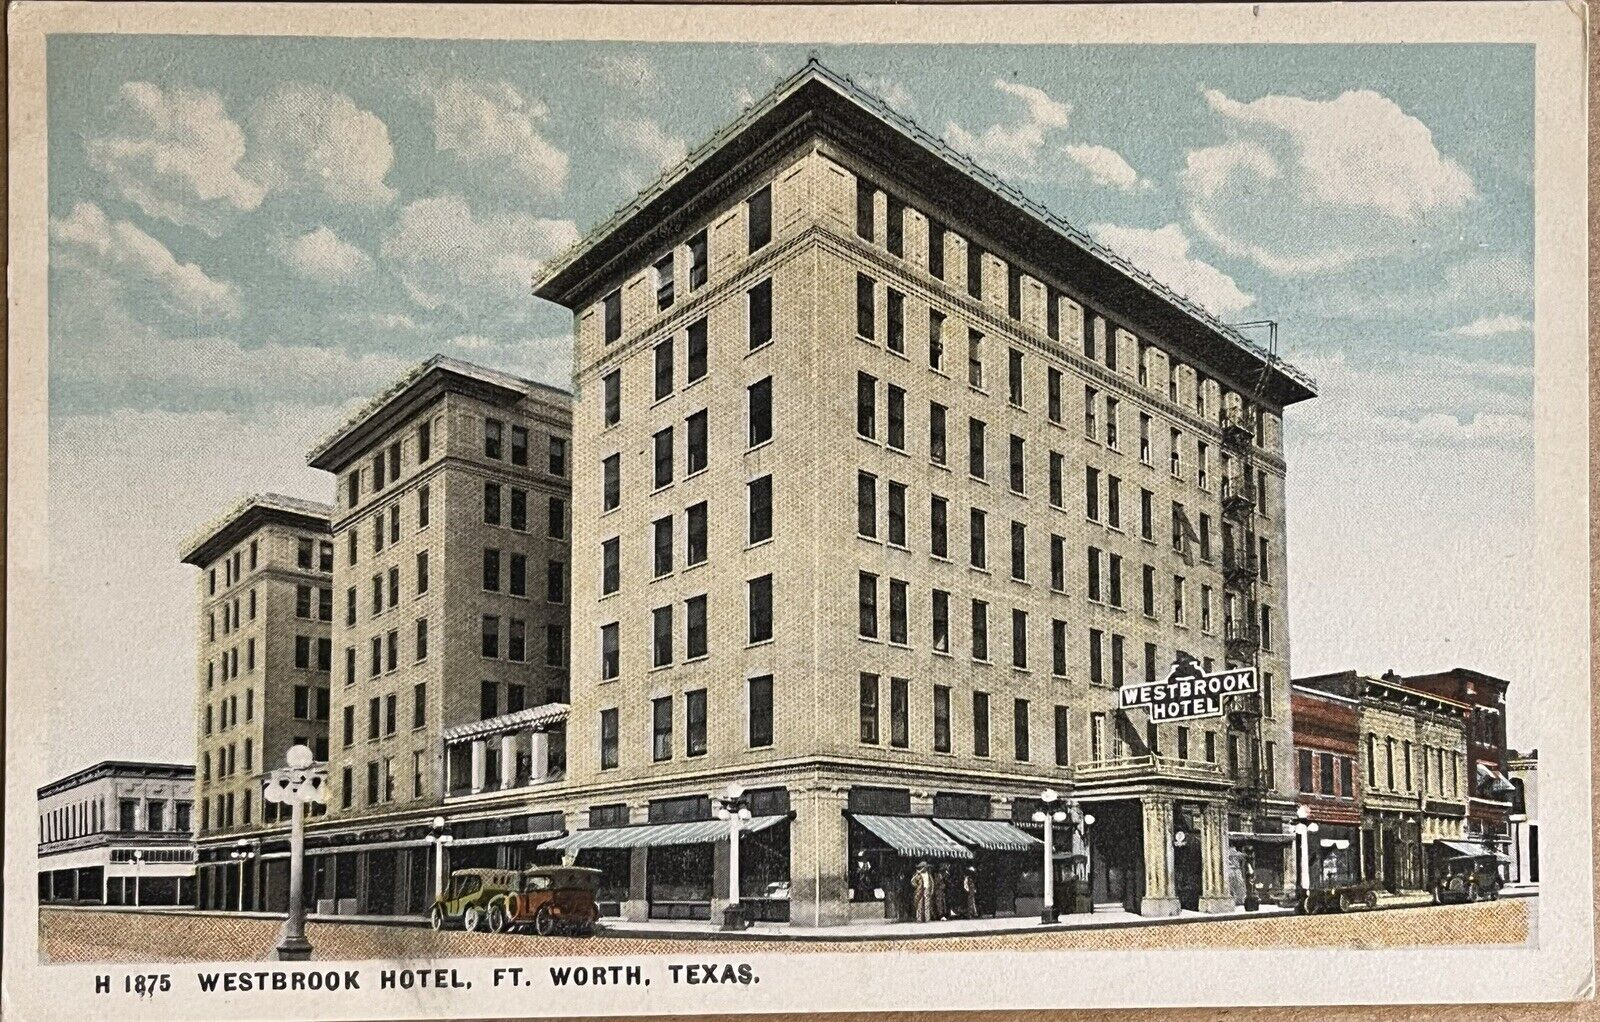 Fort Worth Texas Westbrook Hotel Street View Old Cars Fred Harvey Postcard c1920